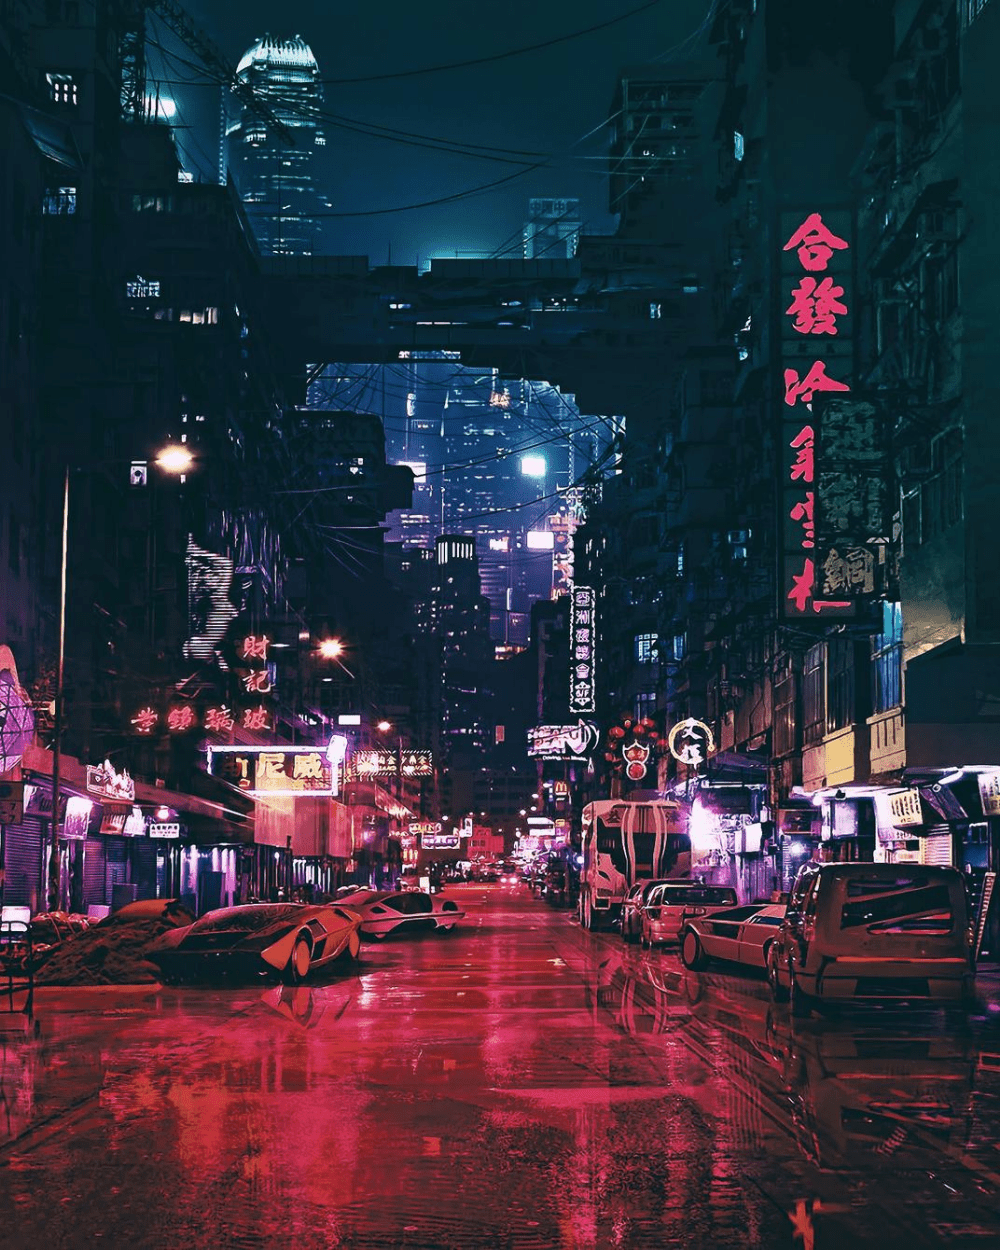 A street at night with neon lights and red lighting on the ground - Cyberpunk